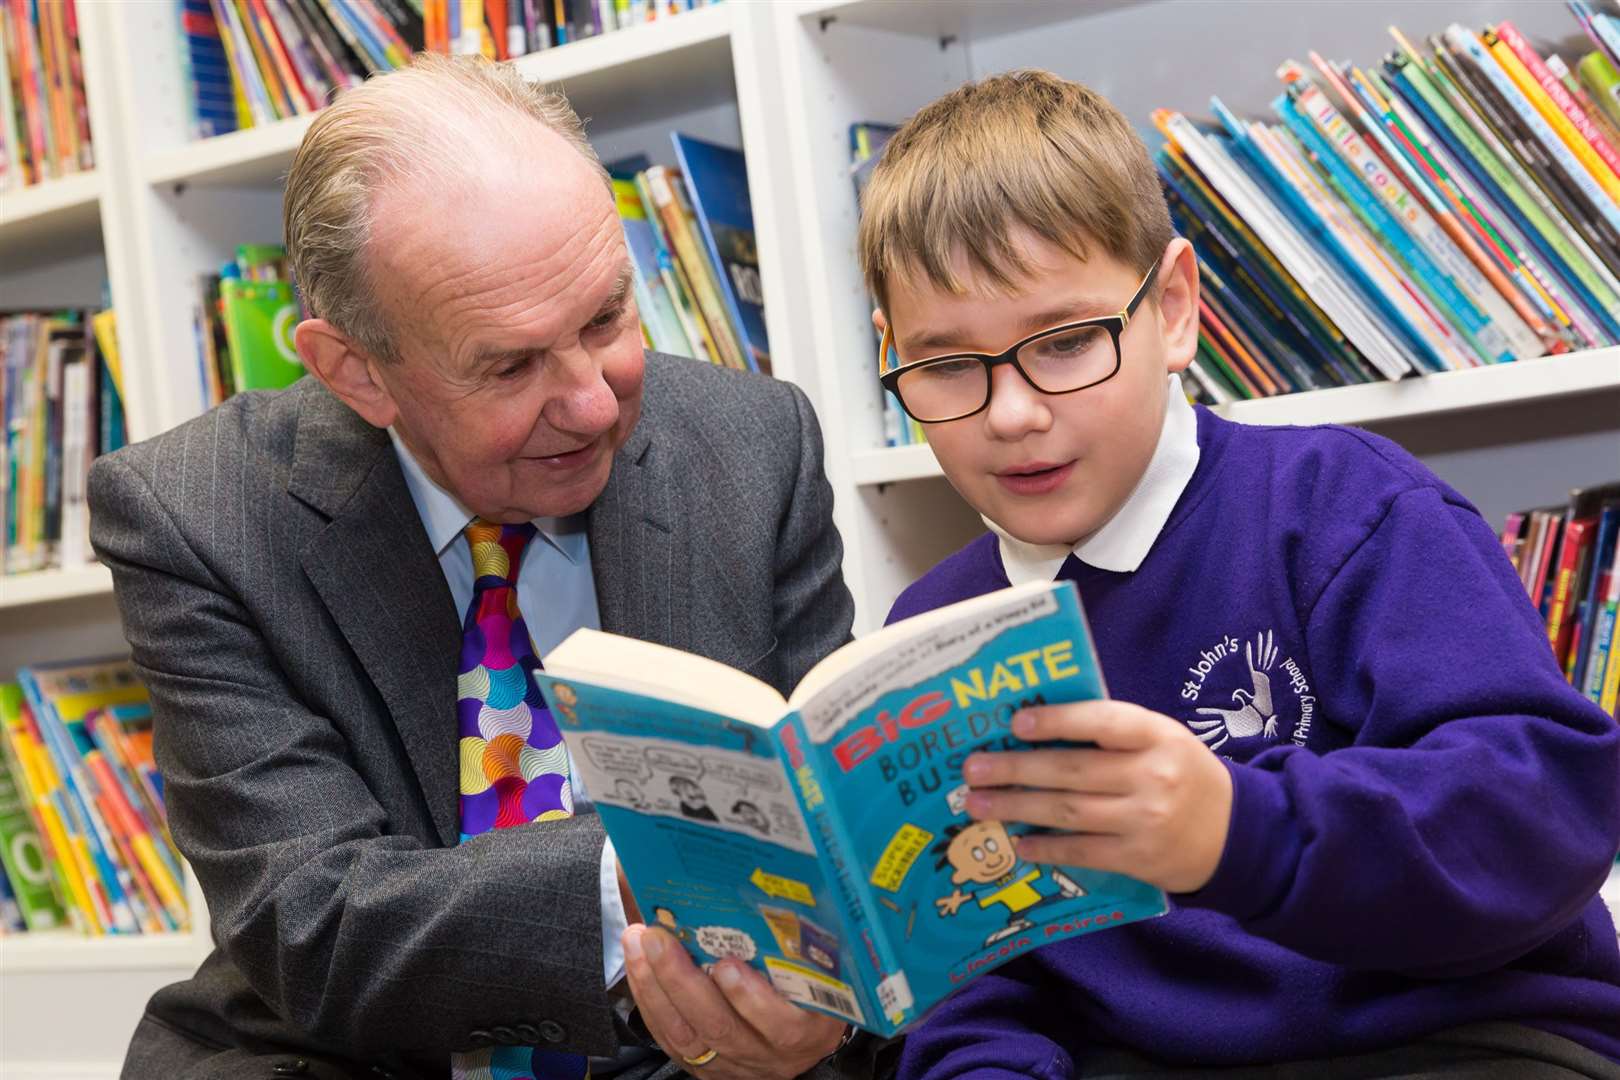 Michael Head was passionate about improving children's literacy